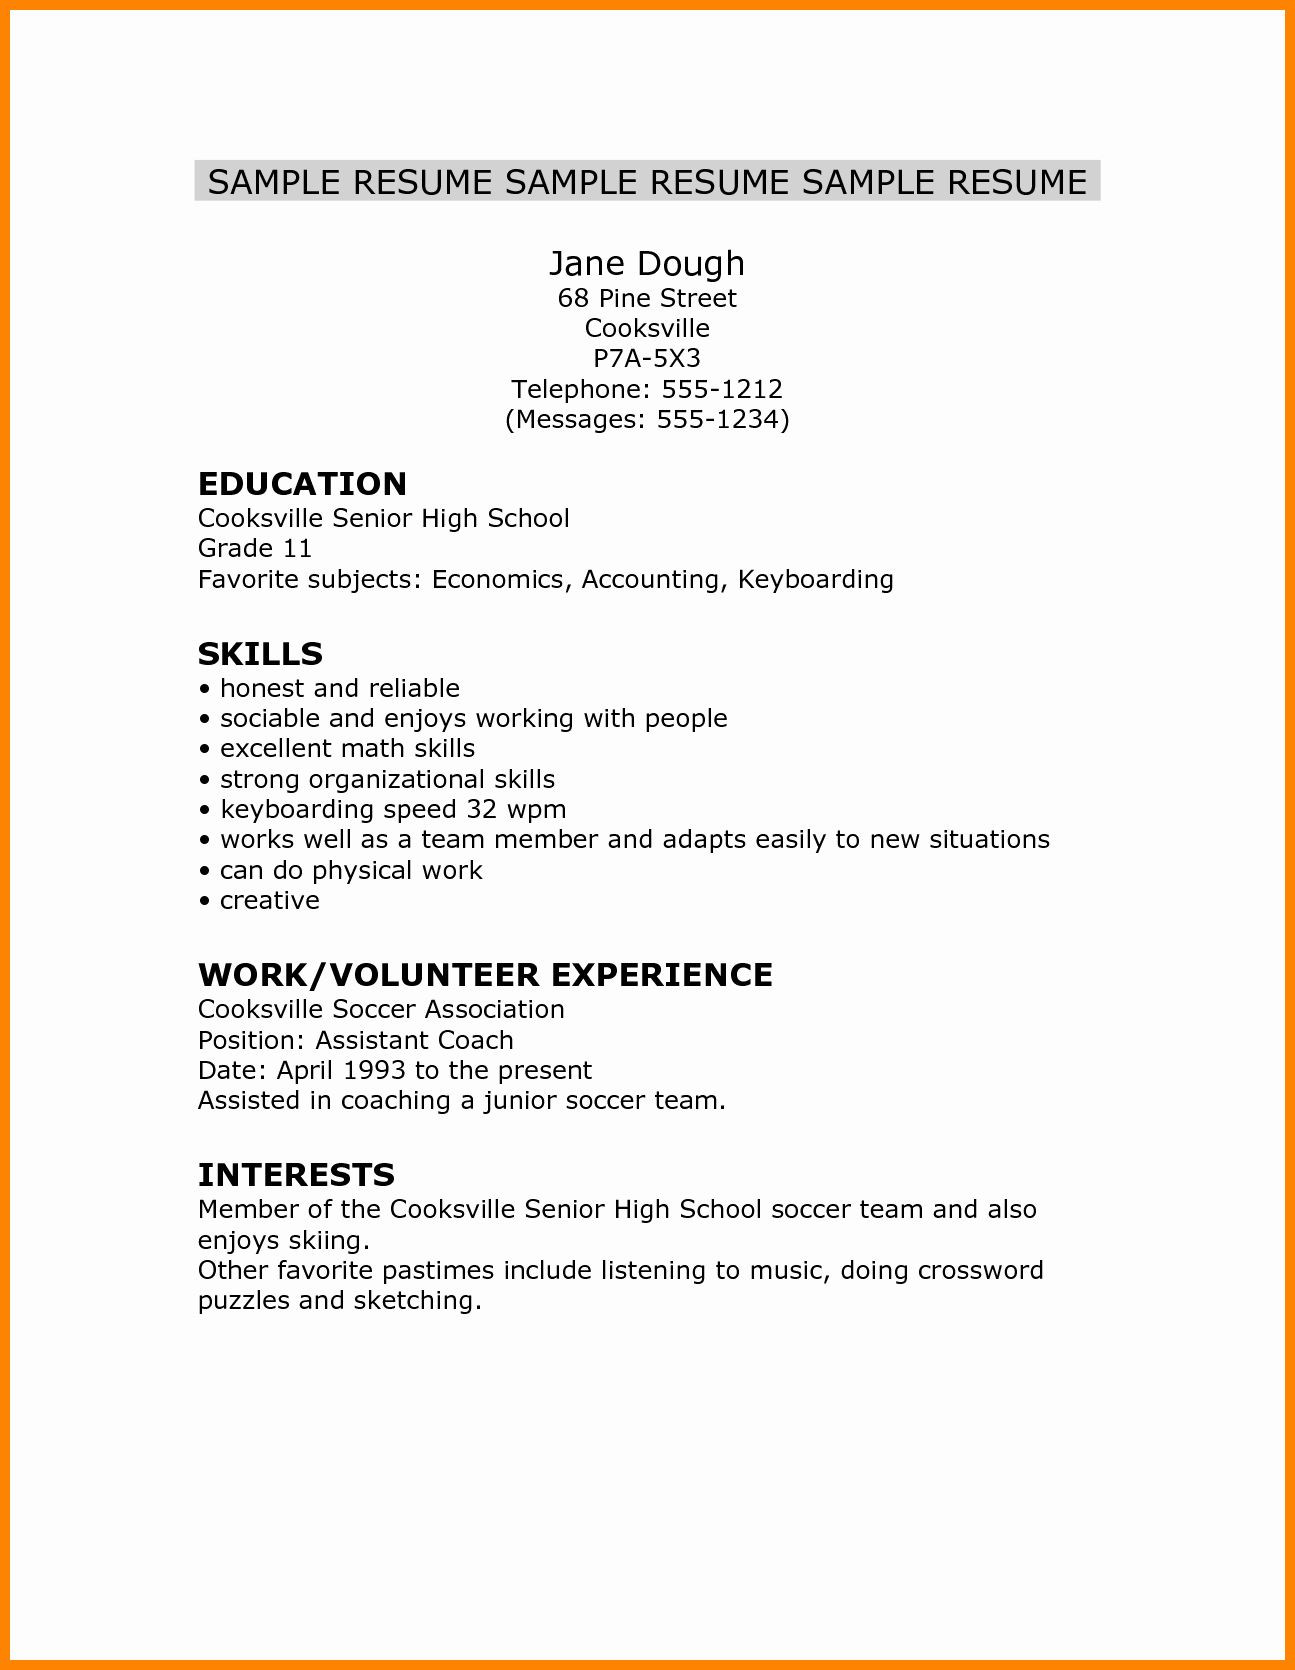 Sample Resumes for Students Graduating Hiogh School Resume High School Student New 5 Cv Template for High School …